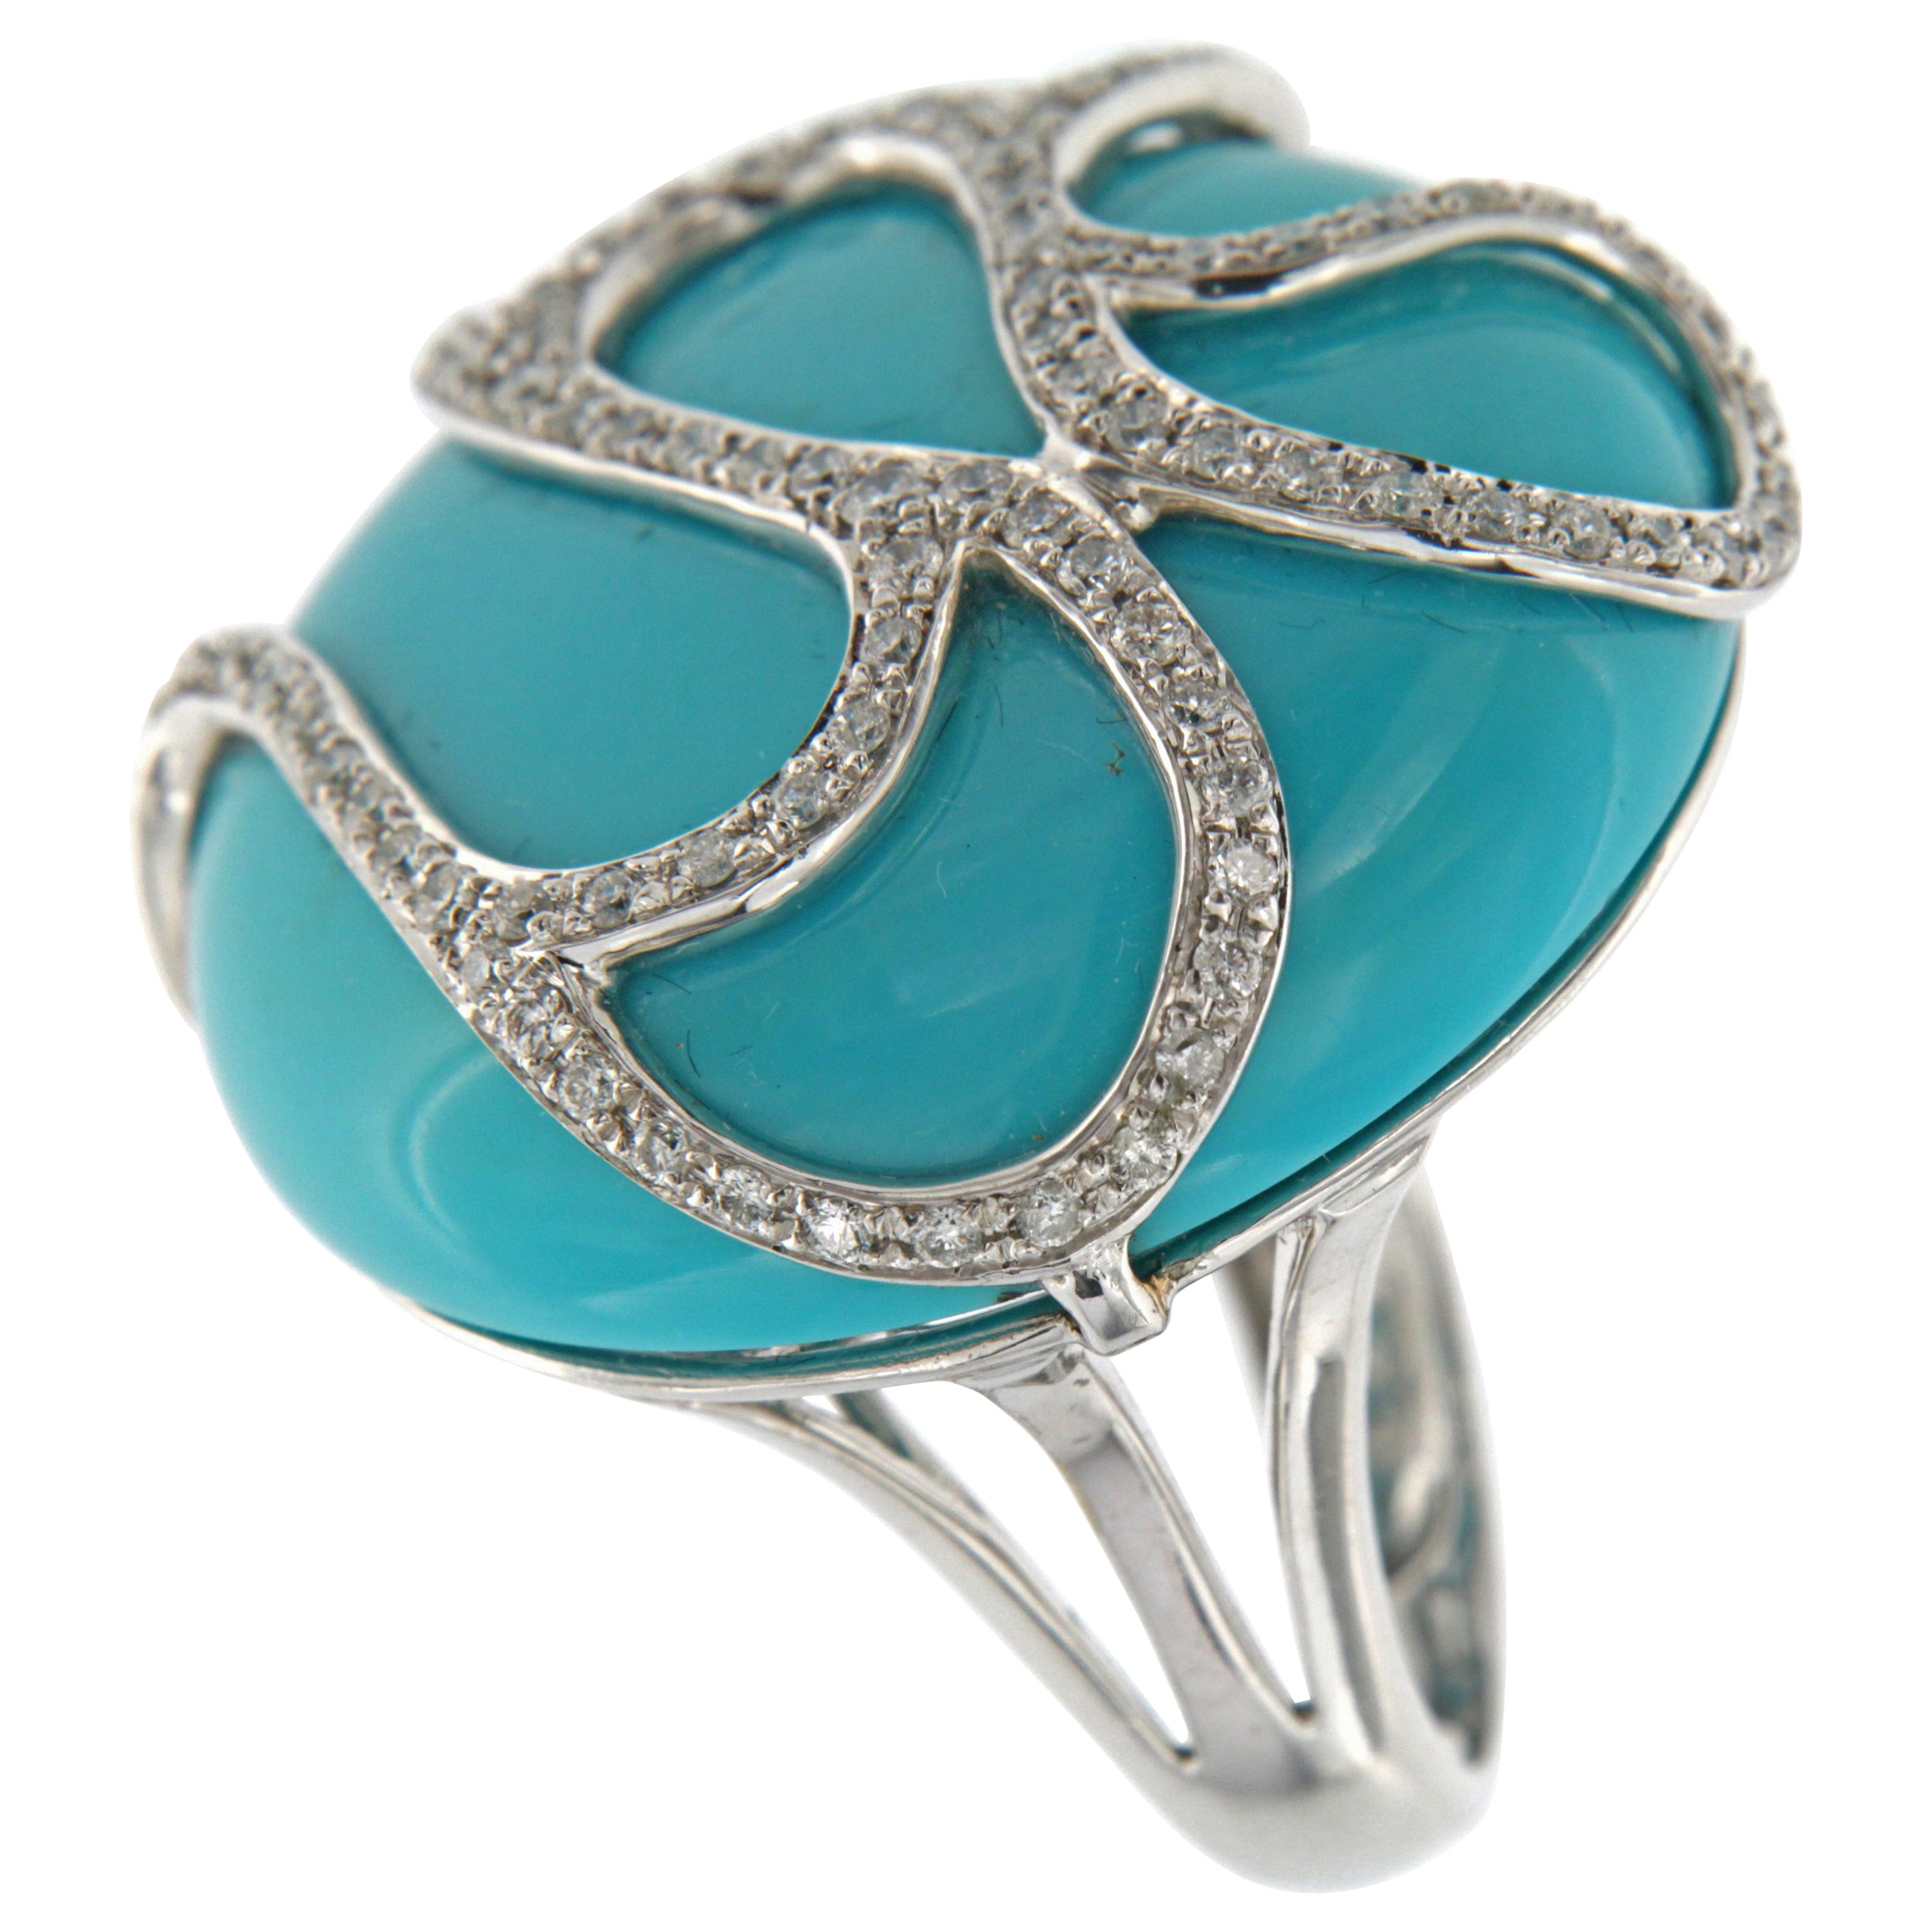 55.85Ct Huge Sleeping Beauty Turquoise Ring with Diamonds in 14K White ...